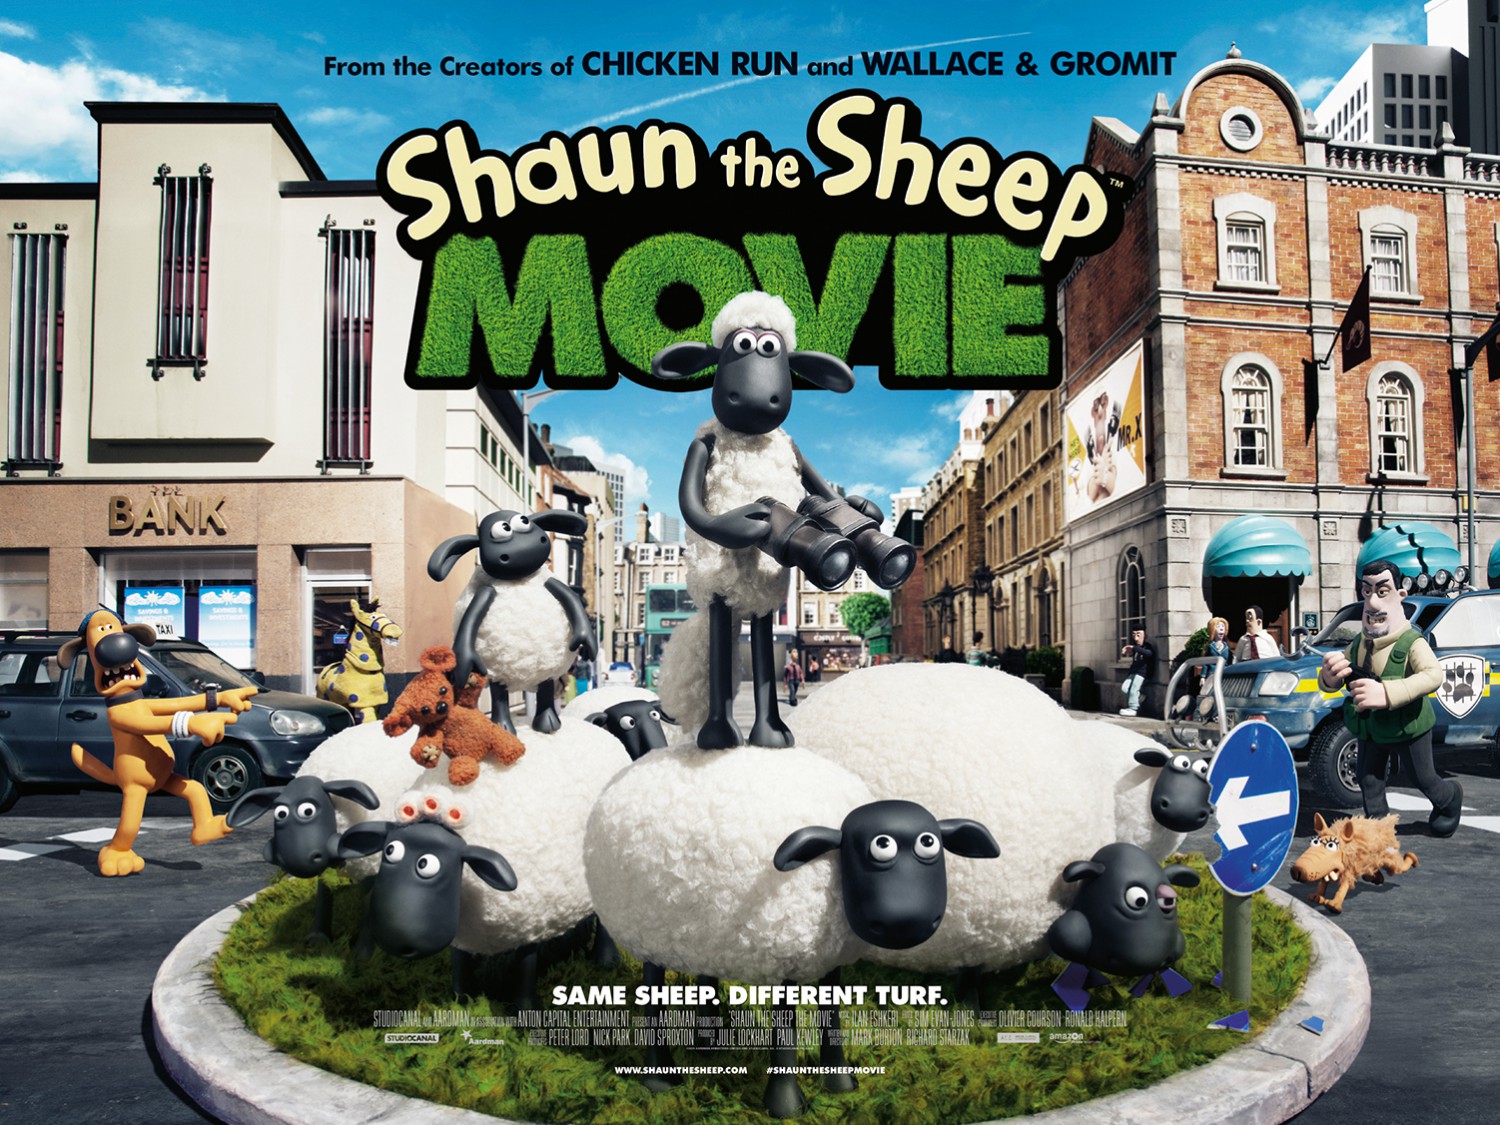 Extra Large Movie Poster Image for Shaun the Sheep (#4 of 23)